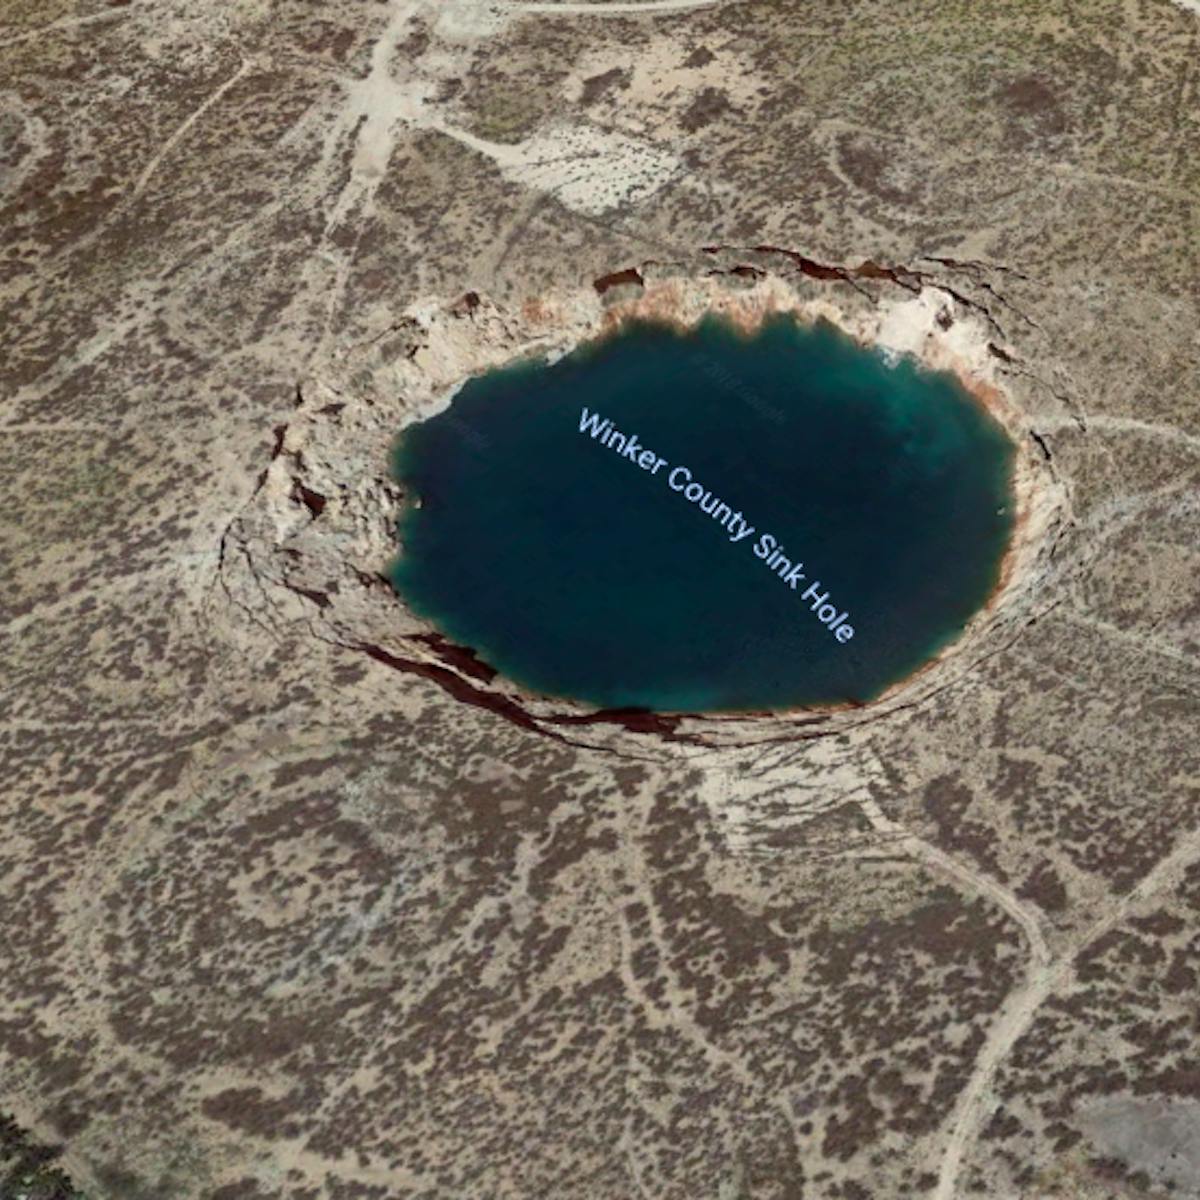 More Sinkholes Could Form As Texas Is Punctured Like A Pin